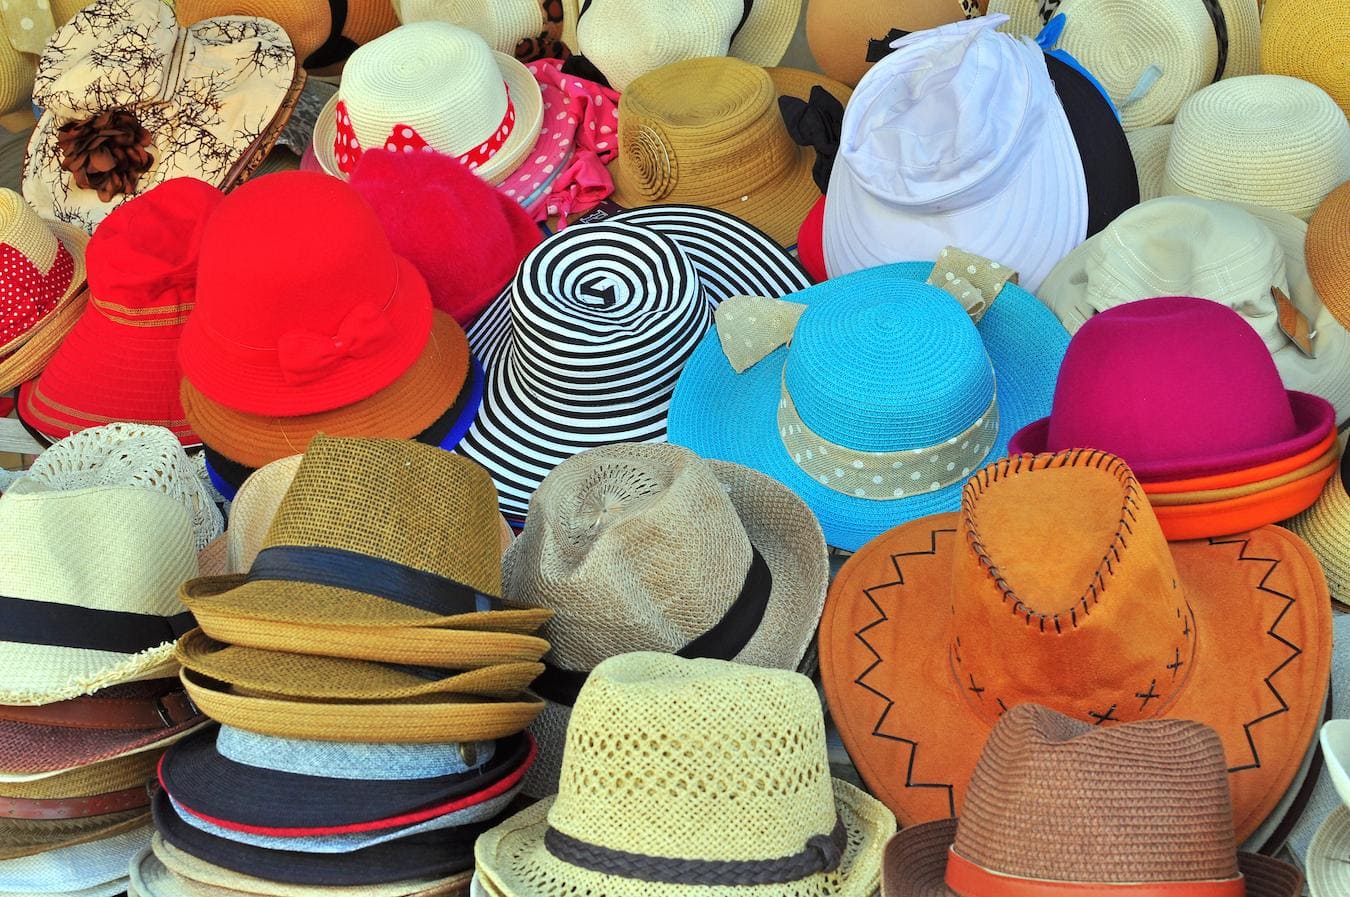 types of hats